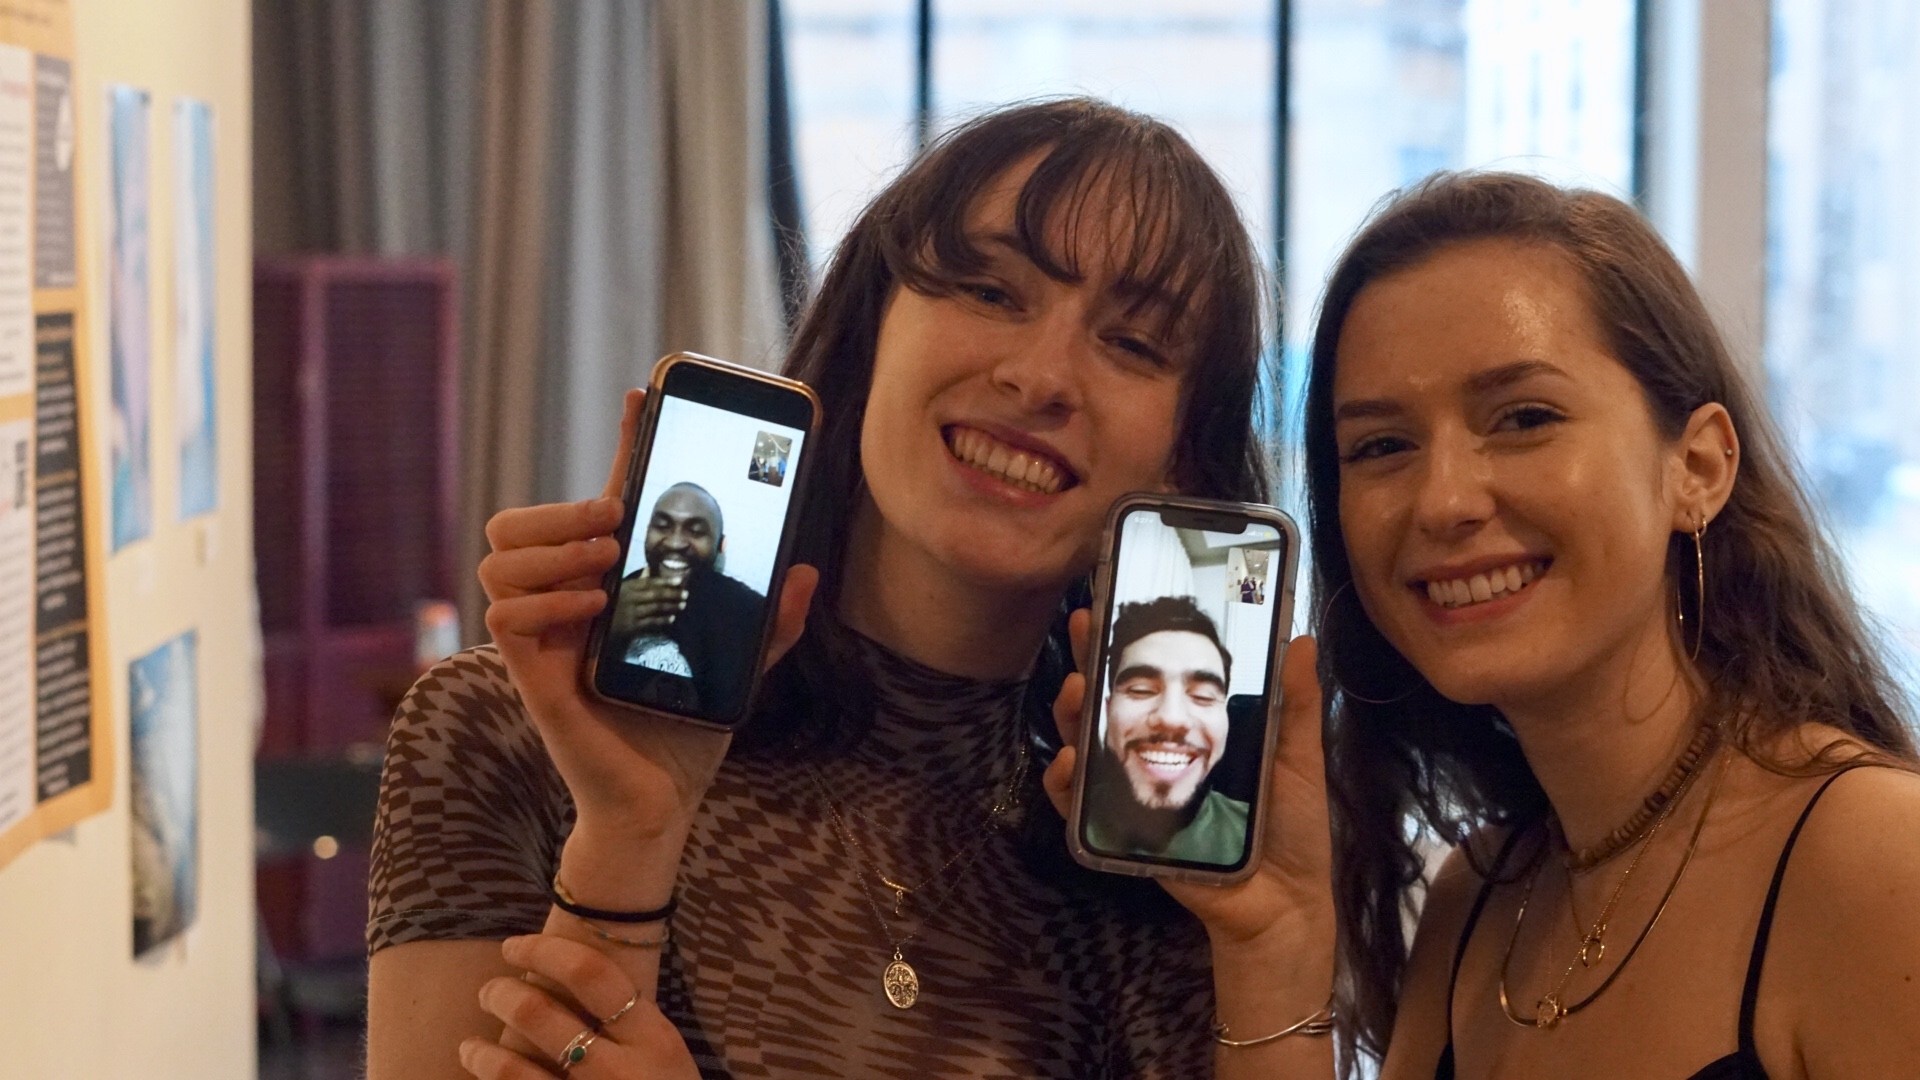 (we Facetimed a few of the artists during the exhibition)